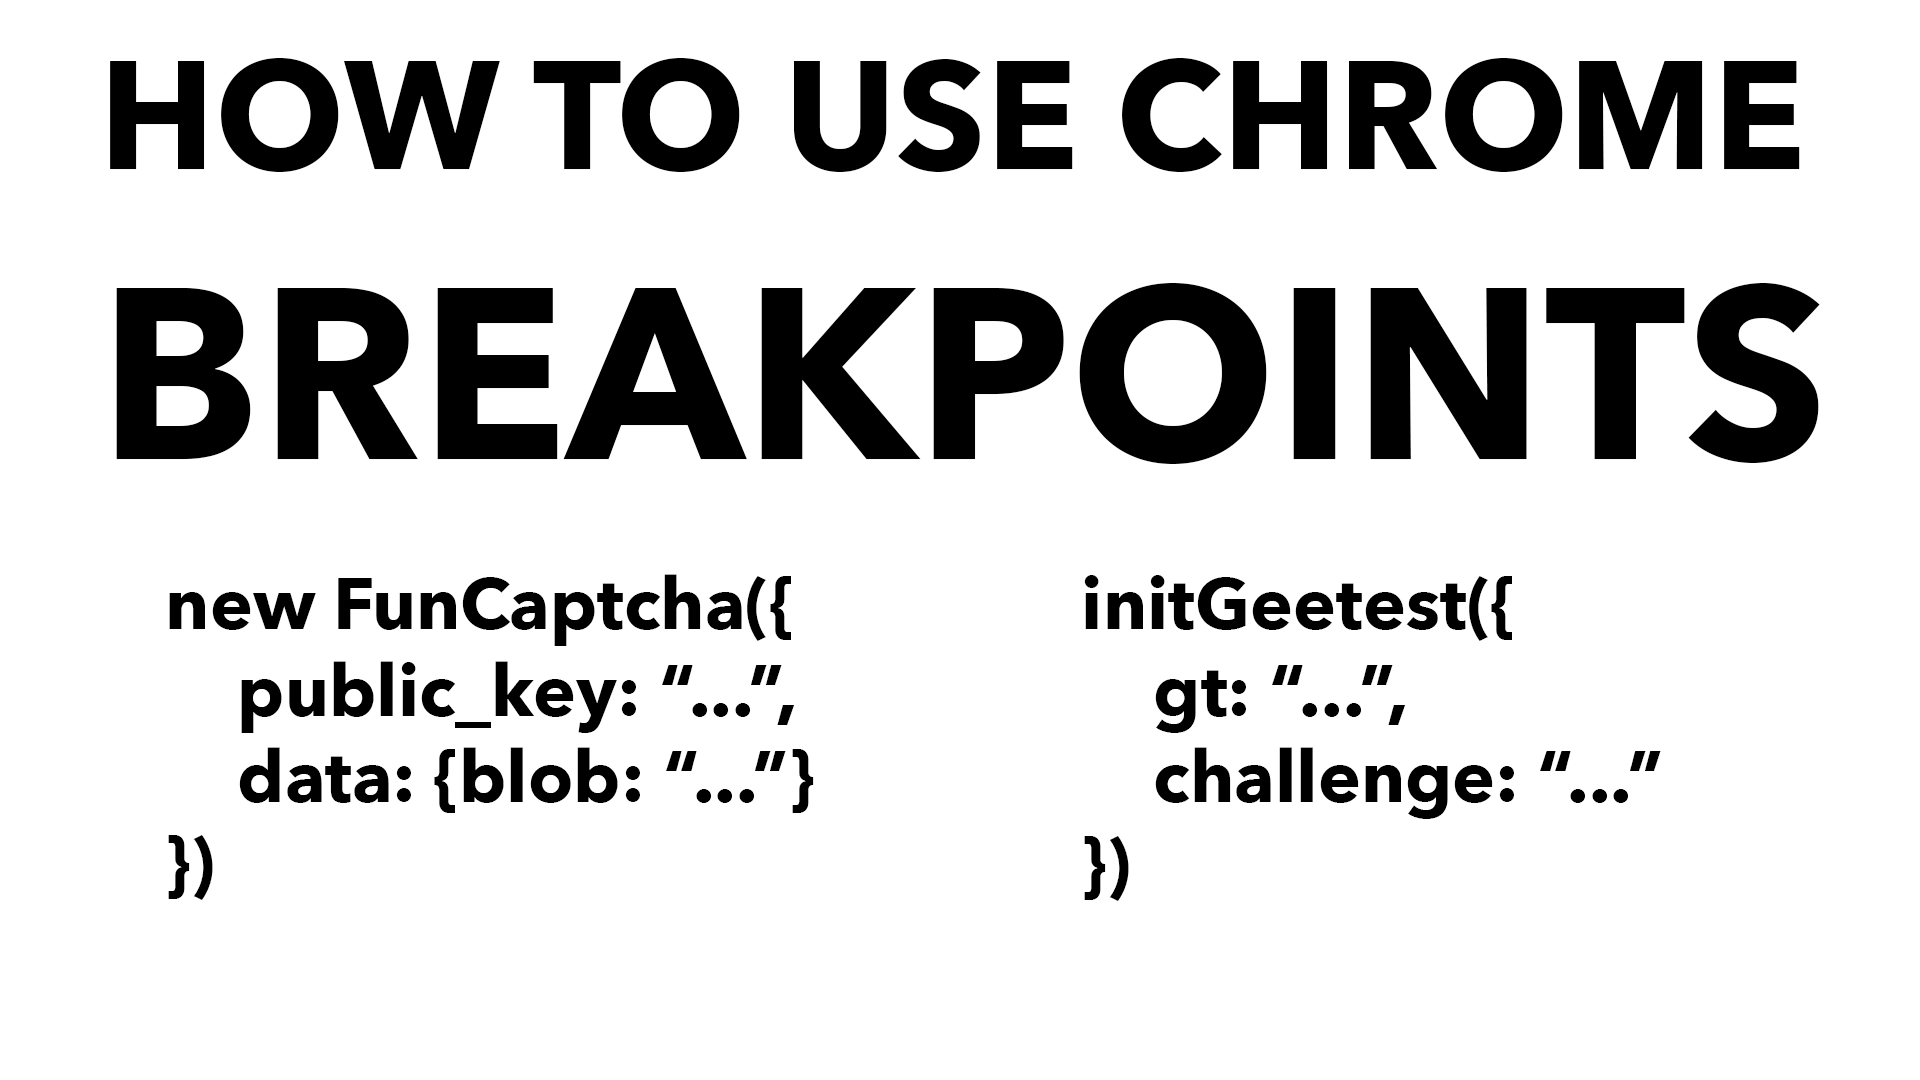 Learn how to use breakpoints in Chrome to find API parameters for FunCaptcha and Geetest